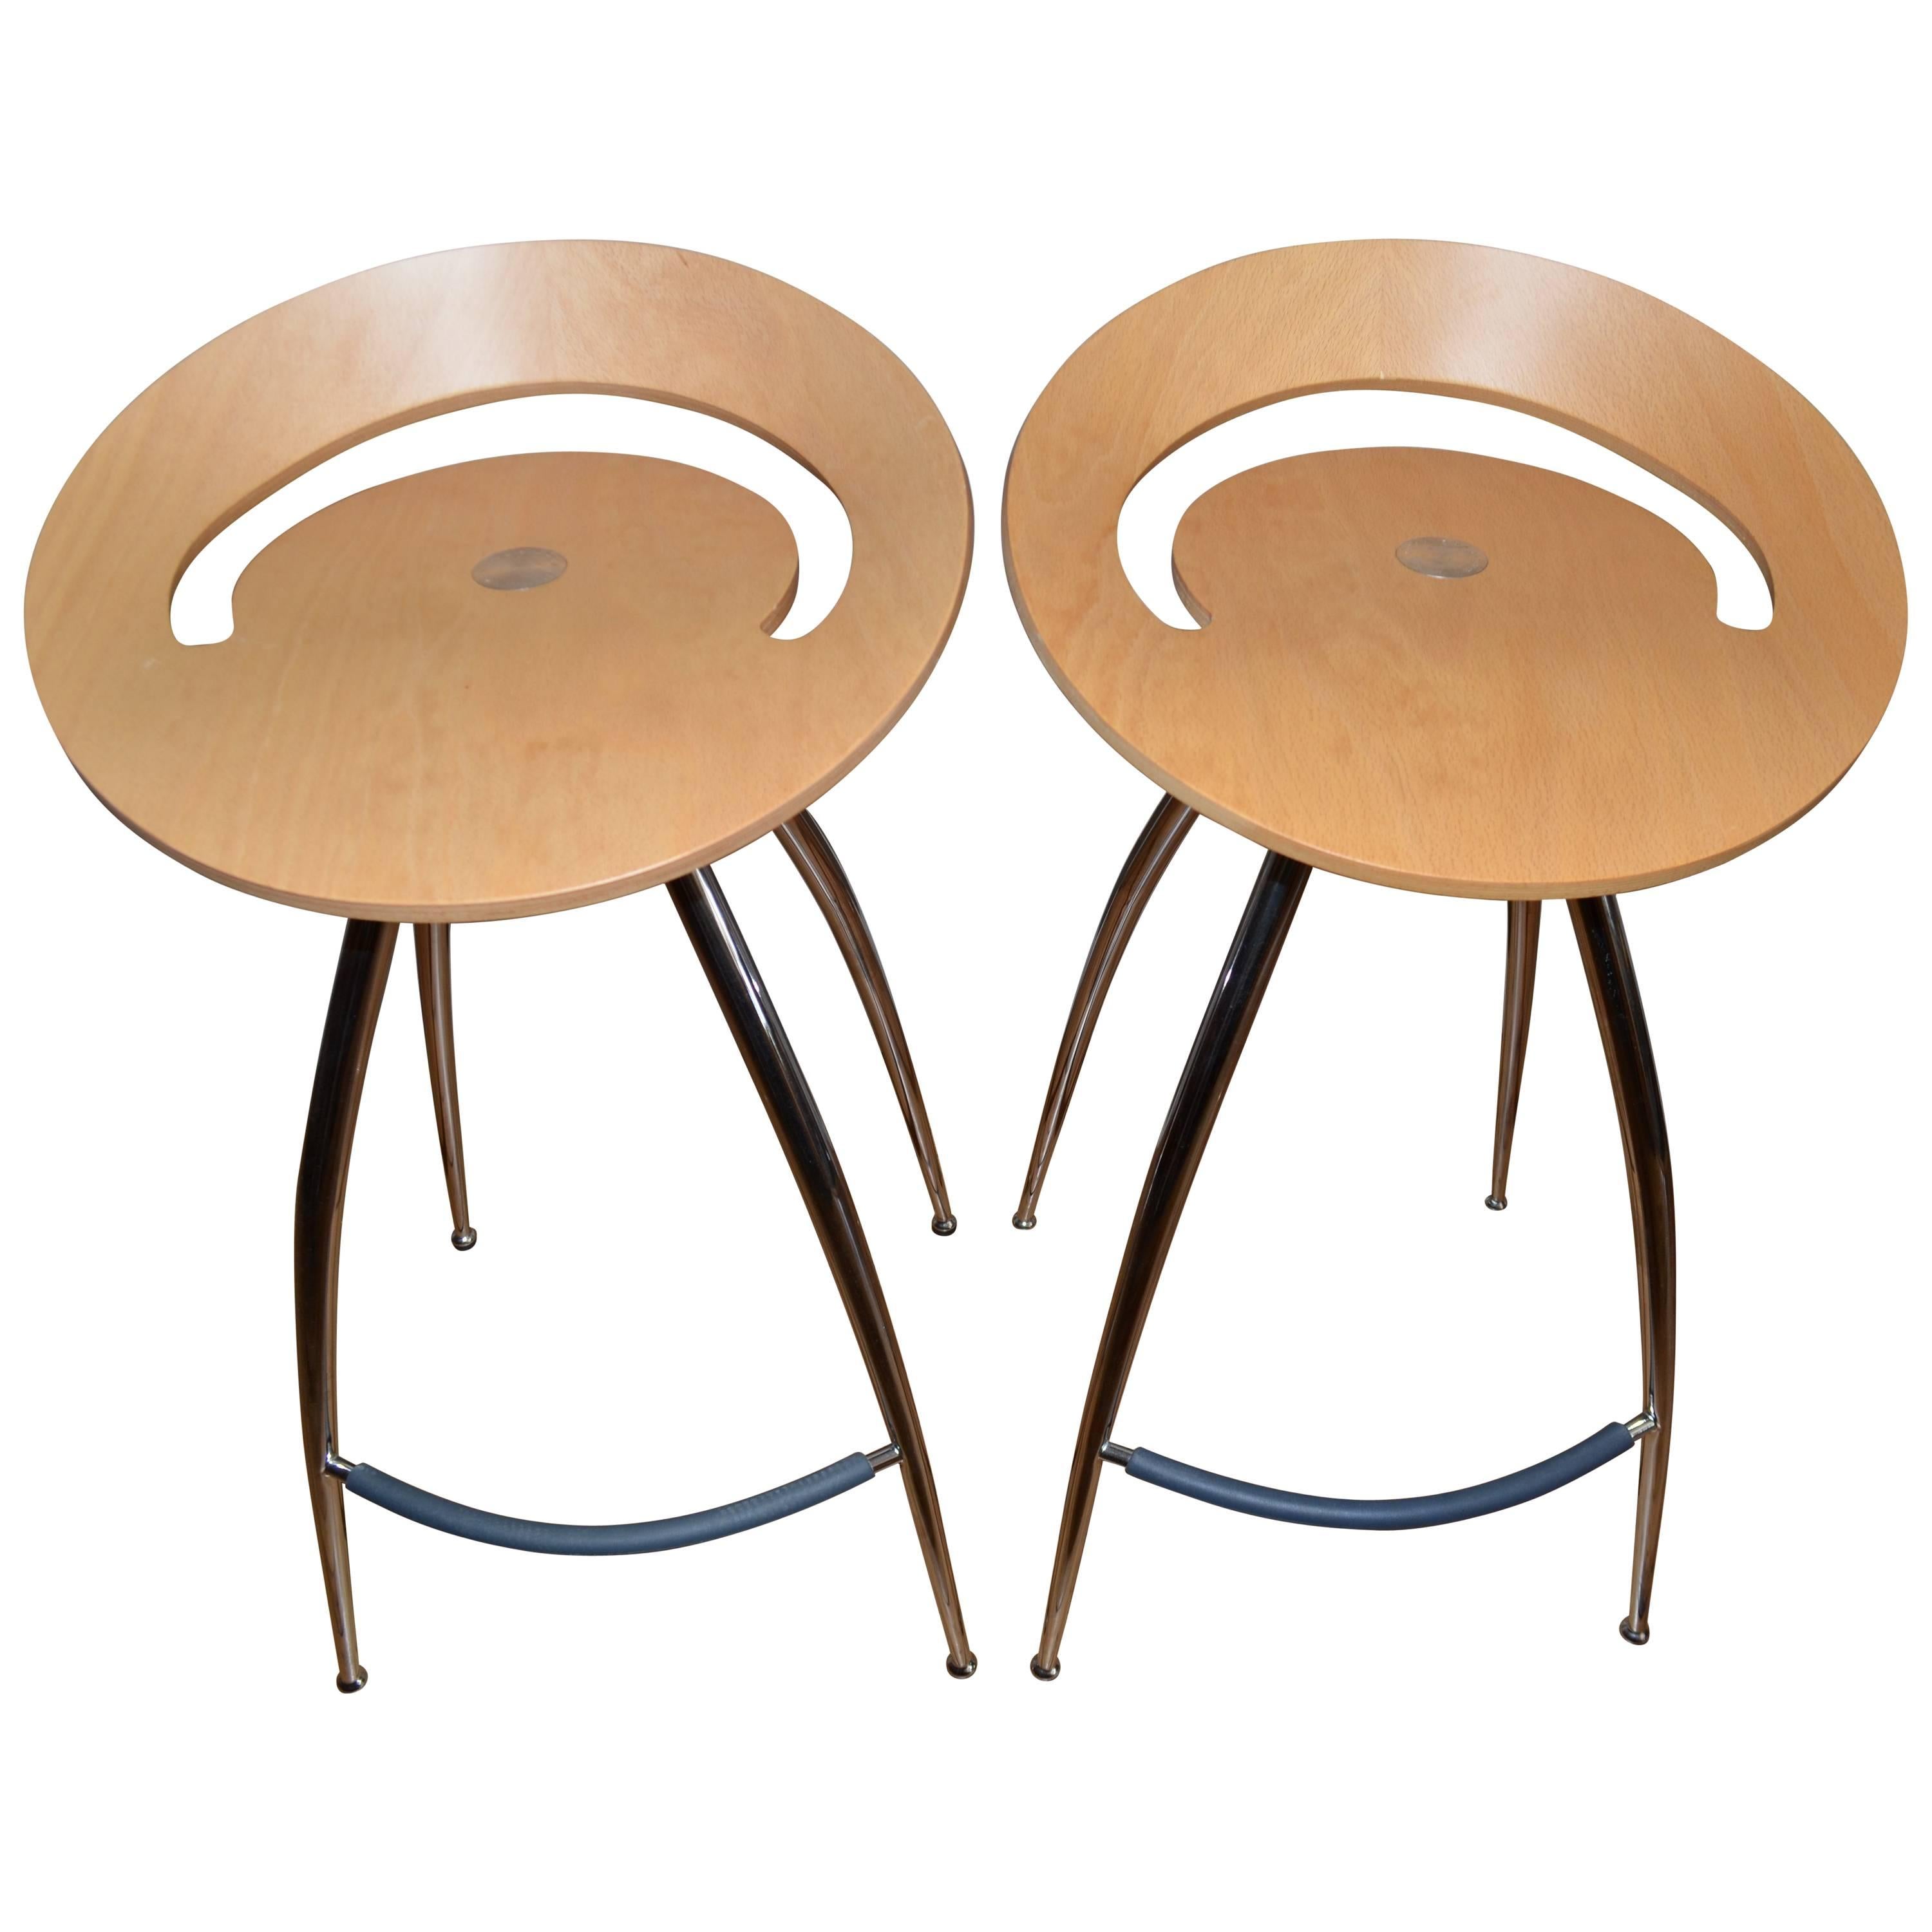 Pair of Lyra Stools by Magus Design of Italy, Distributed through Herman Miller